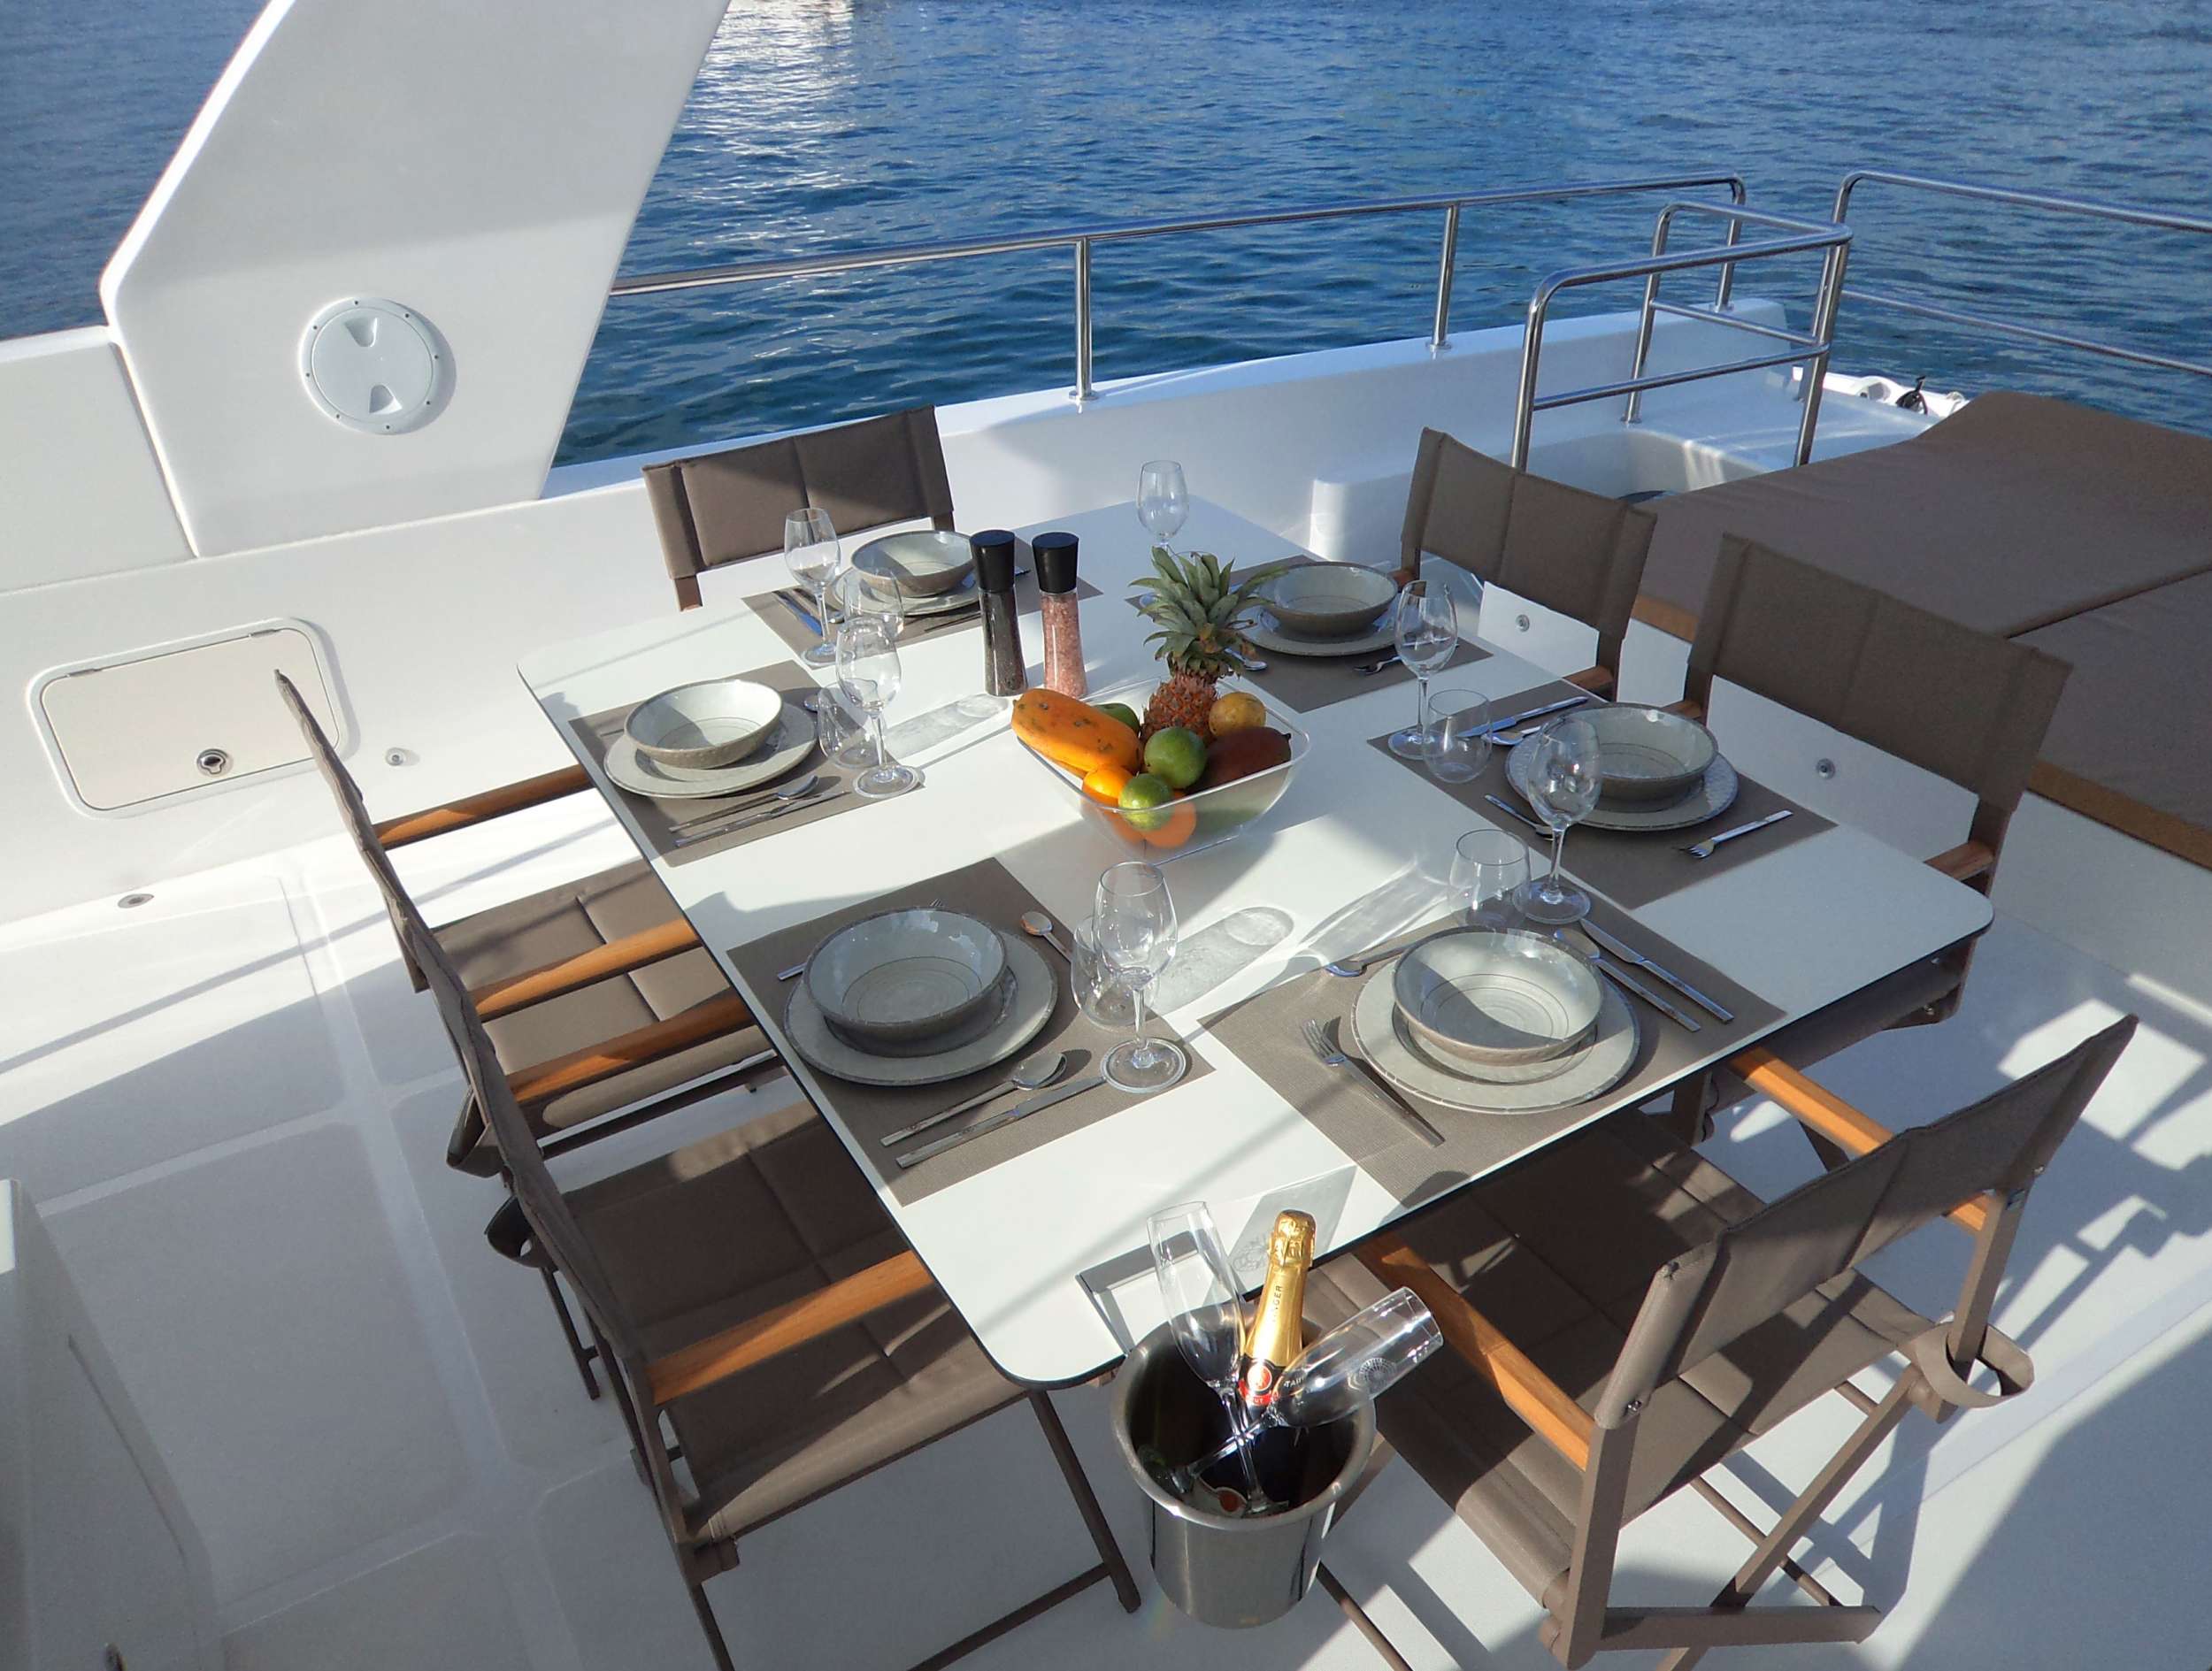 OVER REEF Yacht Charter - Sundeck Dining